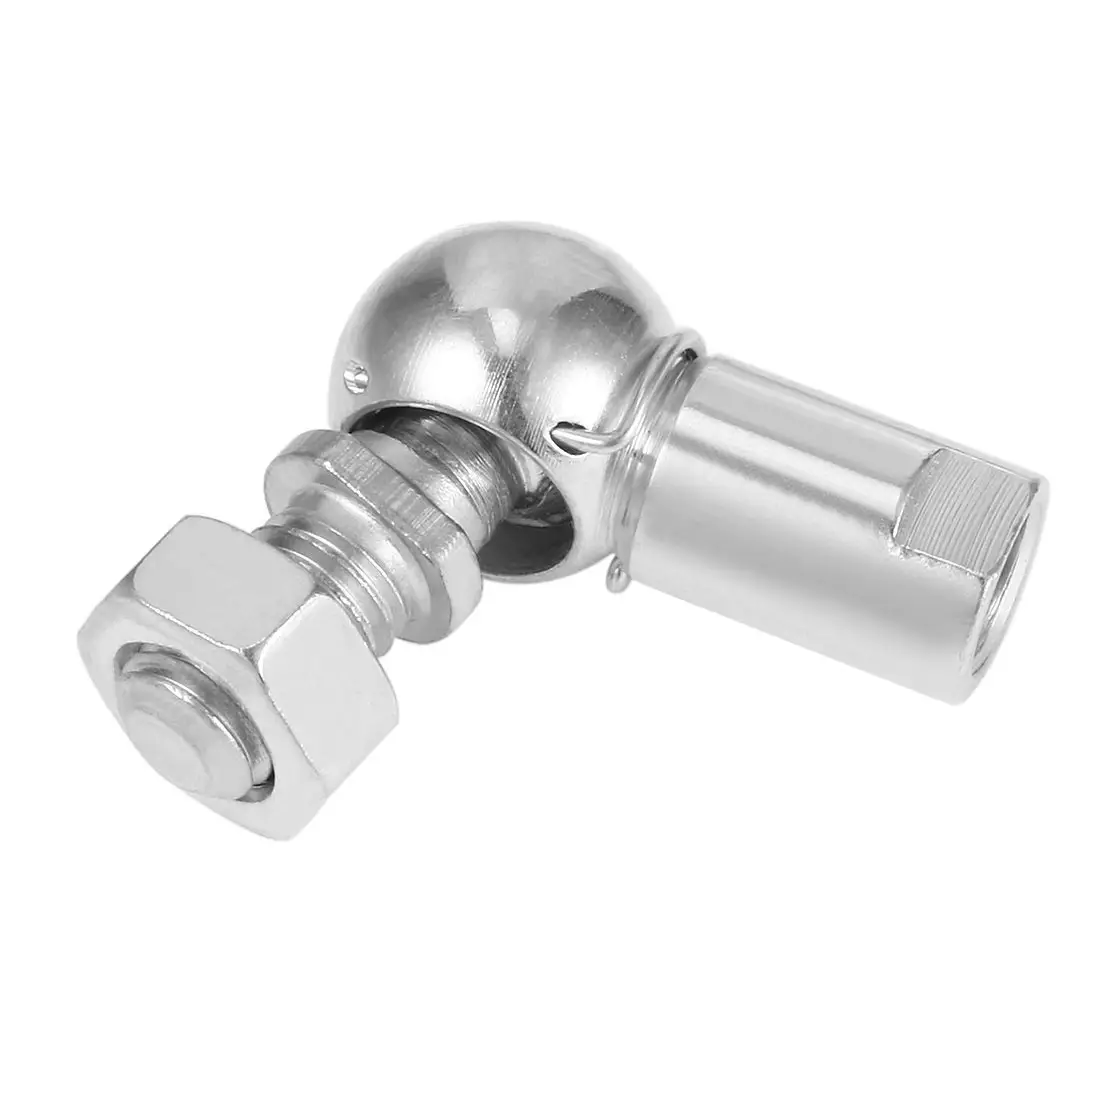 DIN71802-CS-16-M10, Angle Ball Joints, Right Hand, With Threaded Stud and Safety Clips, Carbon Steel, Zinc Plated